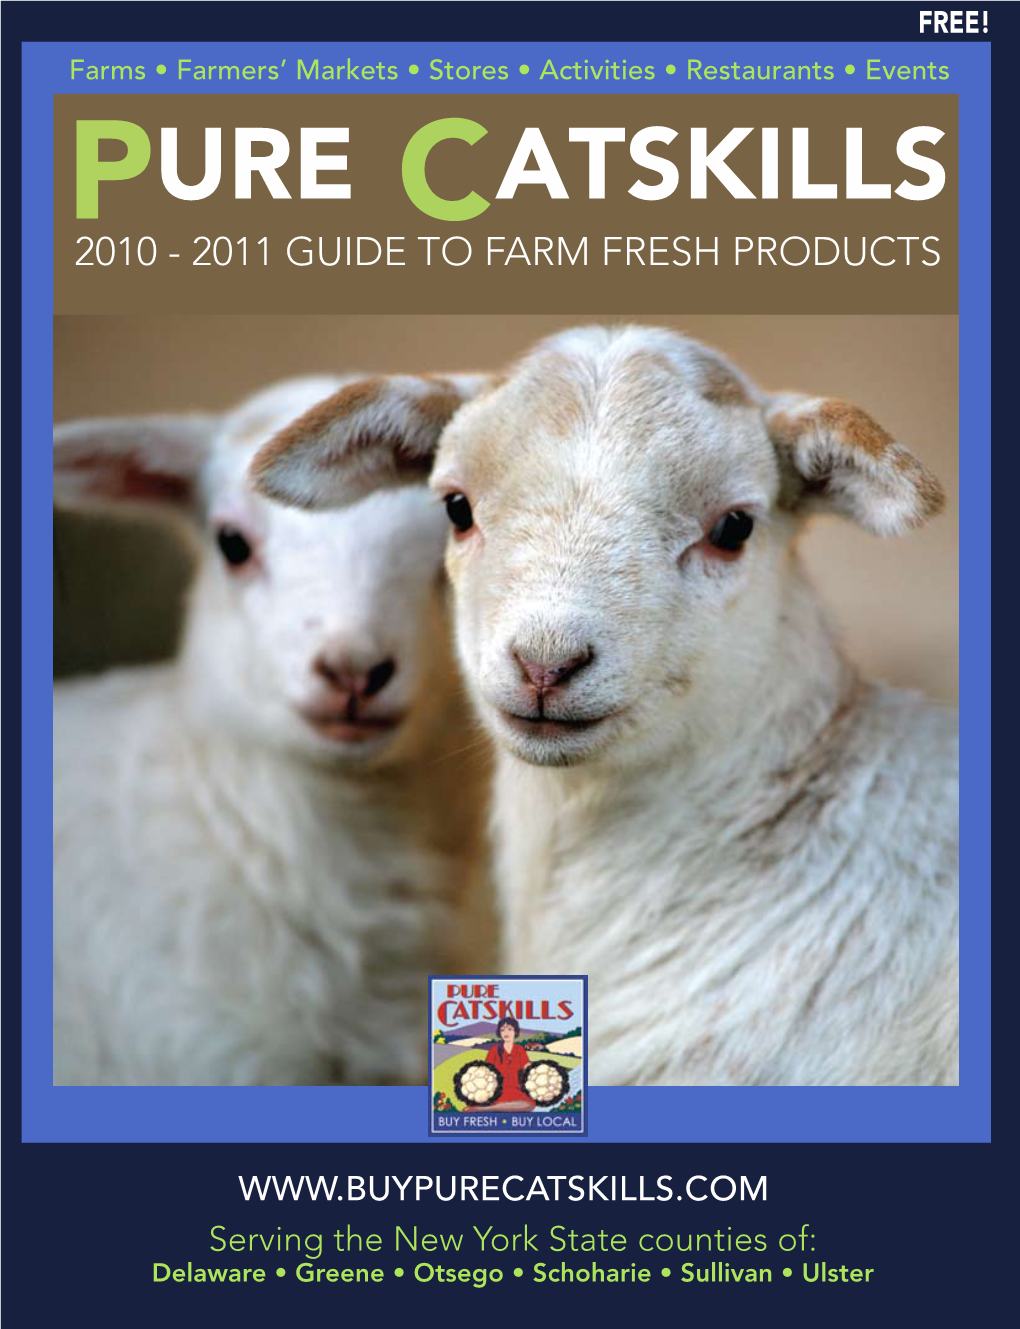 Pure Catskills 2010 - 2011 Guide to Farm Fresh Products